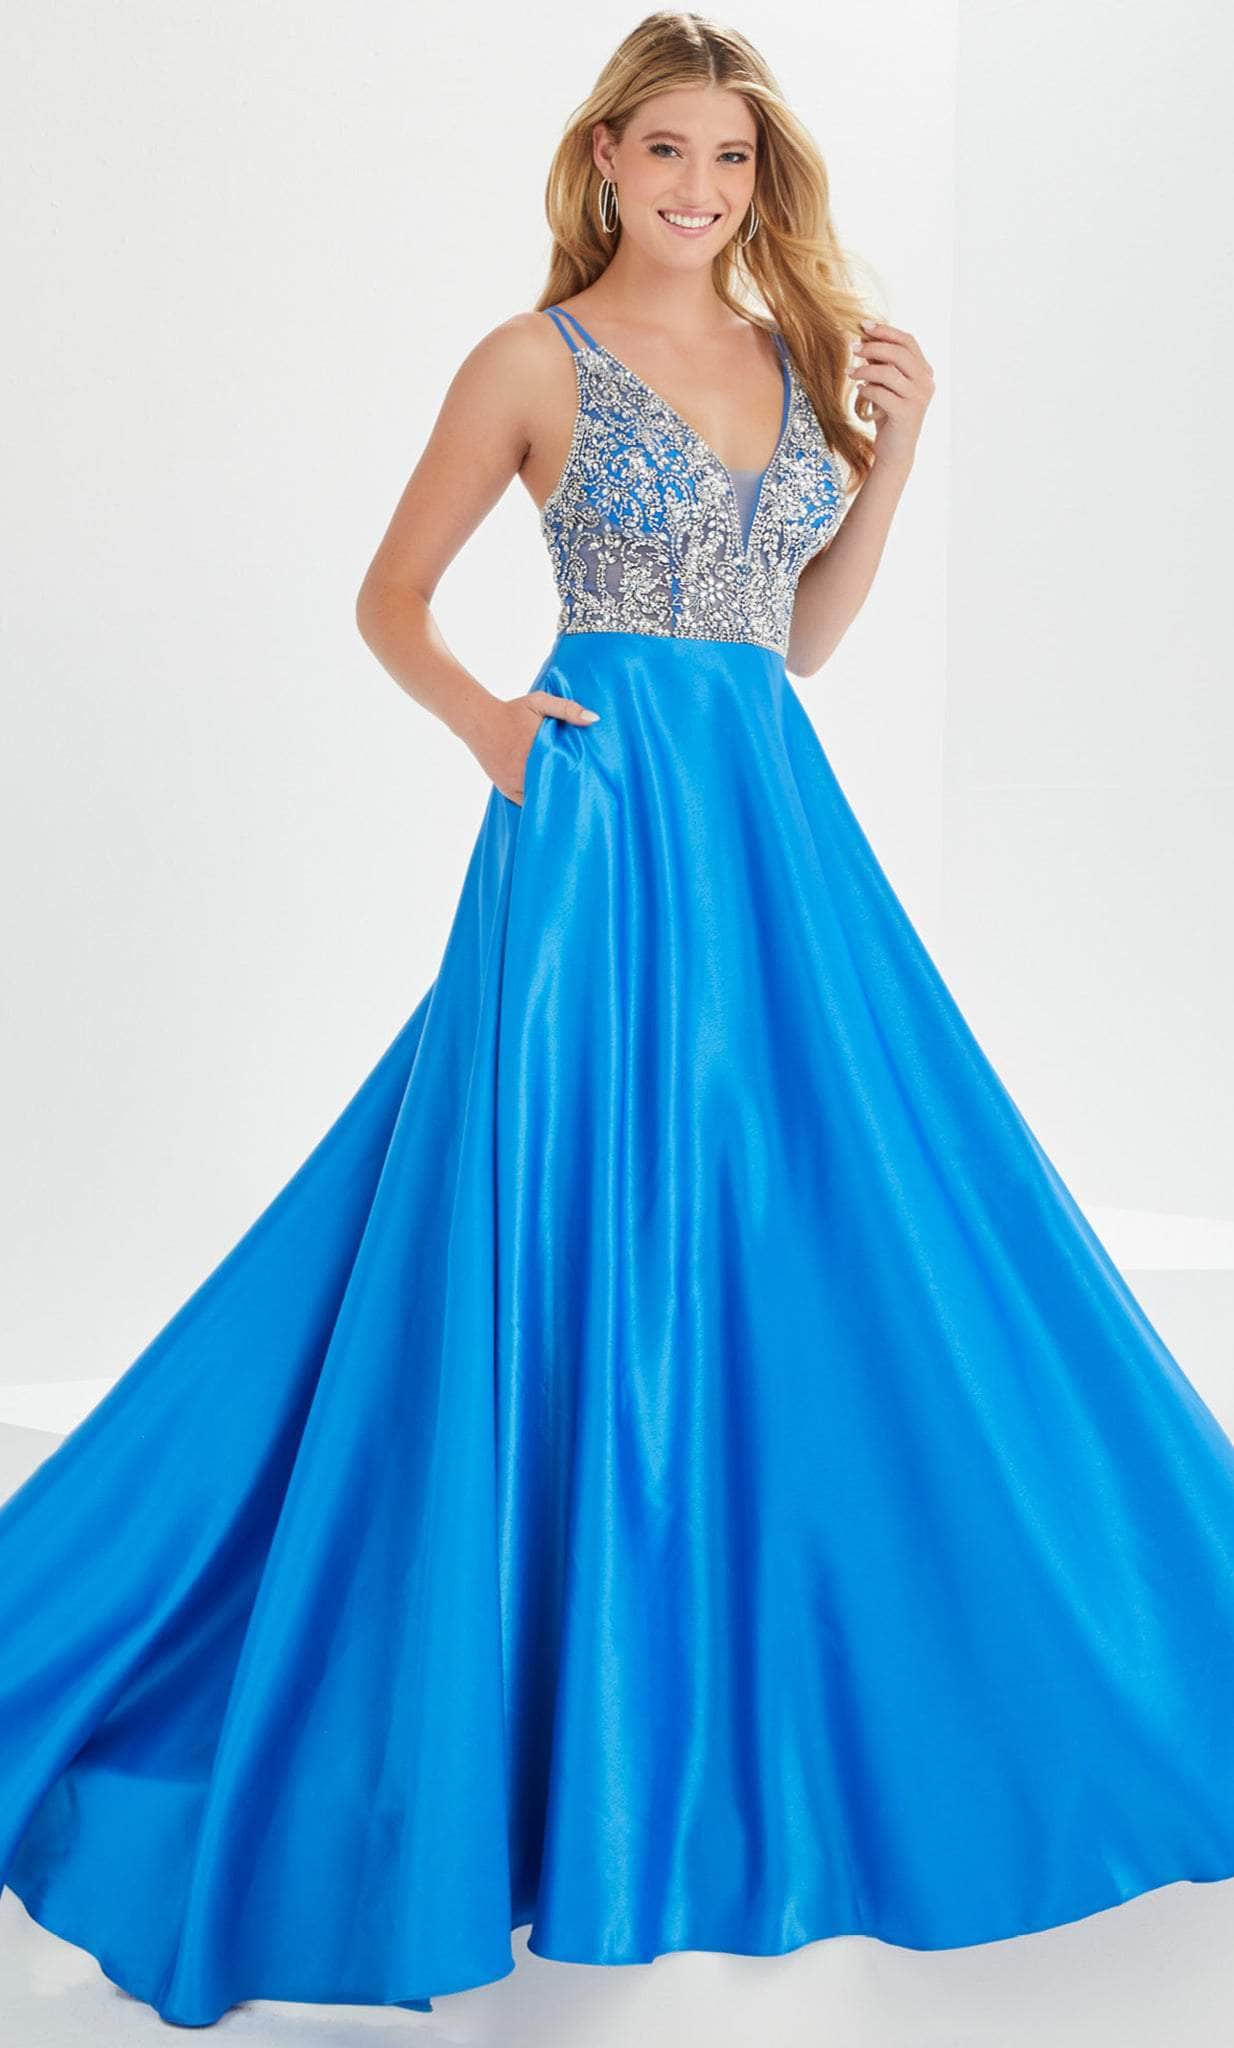 Image of Tiffany Designs by Christina Wu 16024 - Embellished Bodice Prom Gown